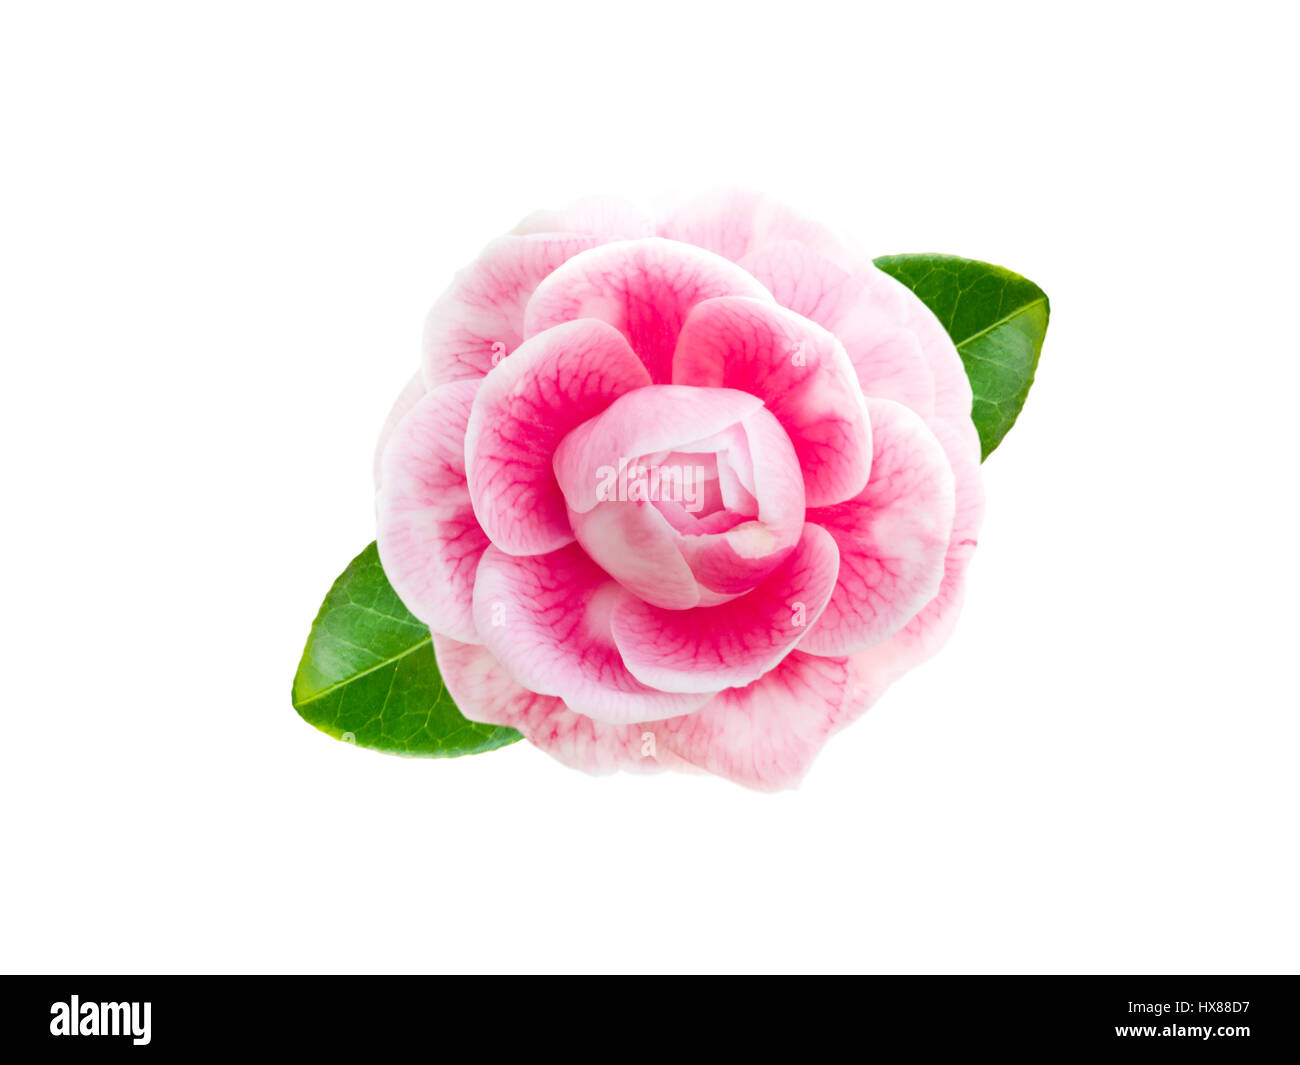 Tender pink camellia rose form flower with leaves isolated on white Stock Photo